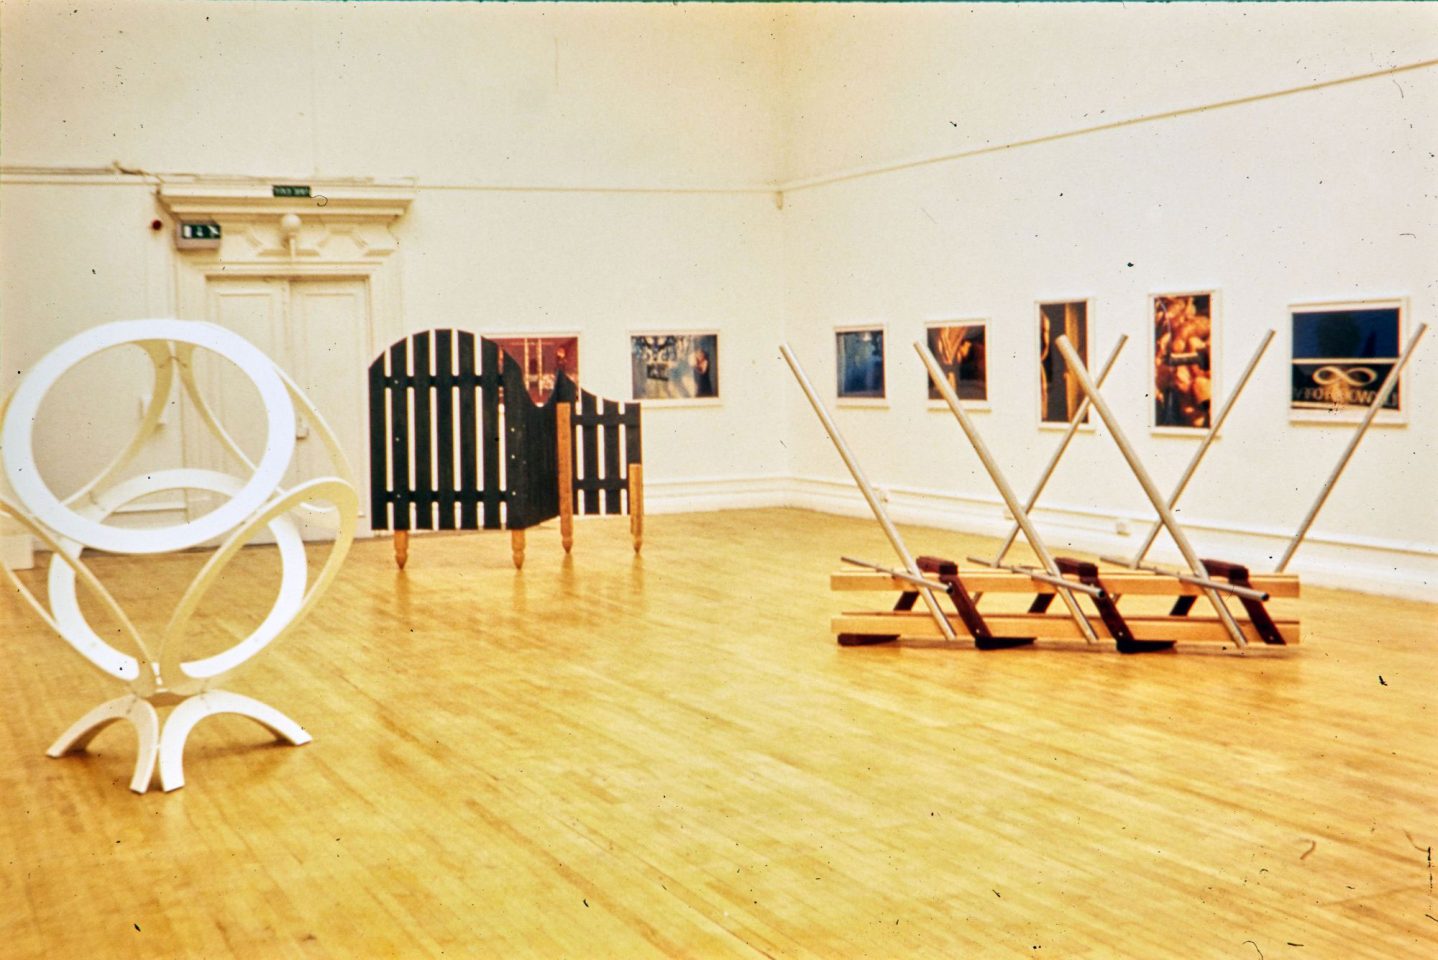 Installation view from 1999 exhibition Drive By: New Art from LA.
